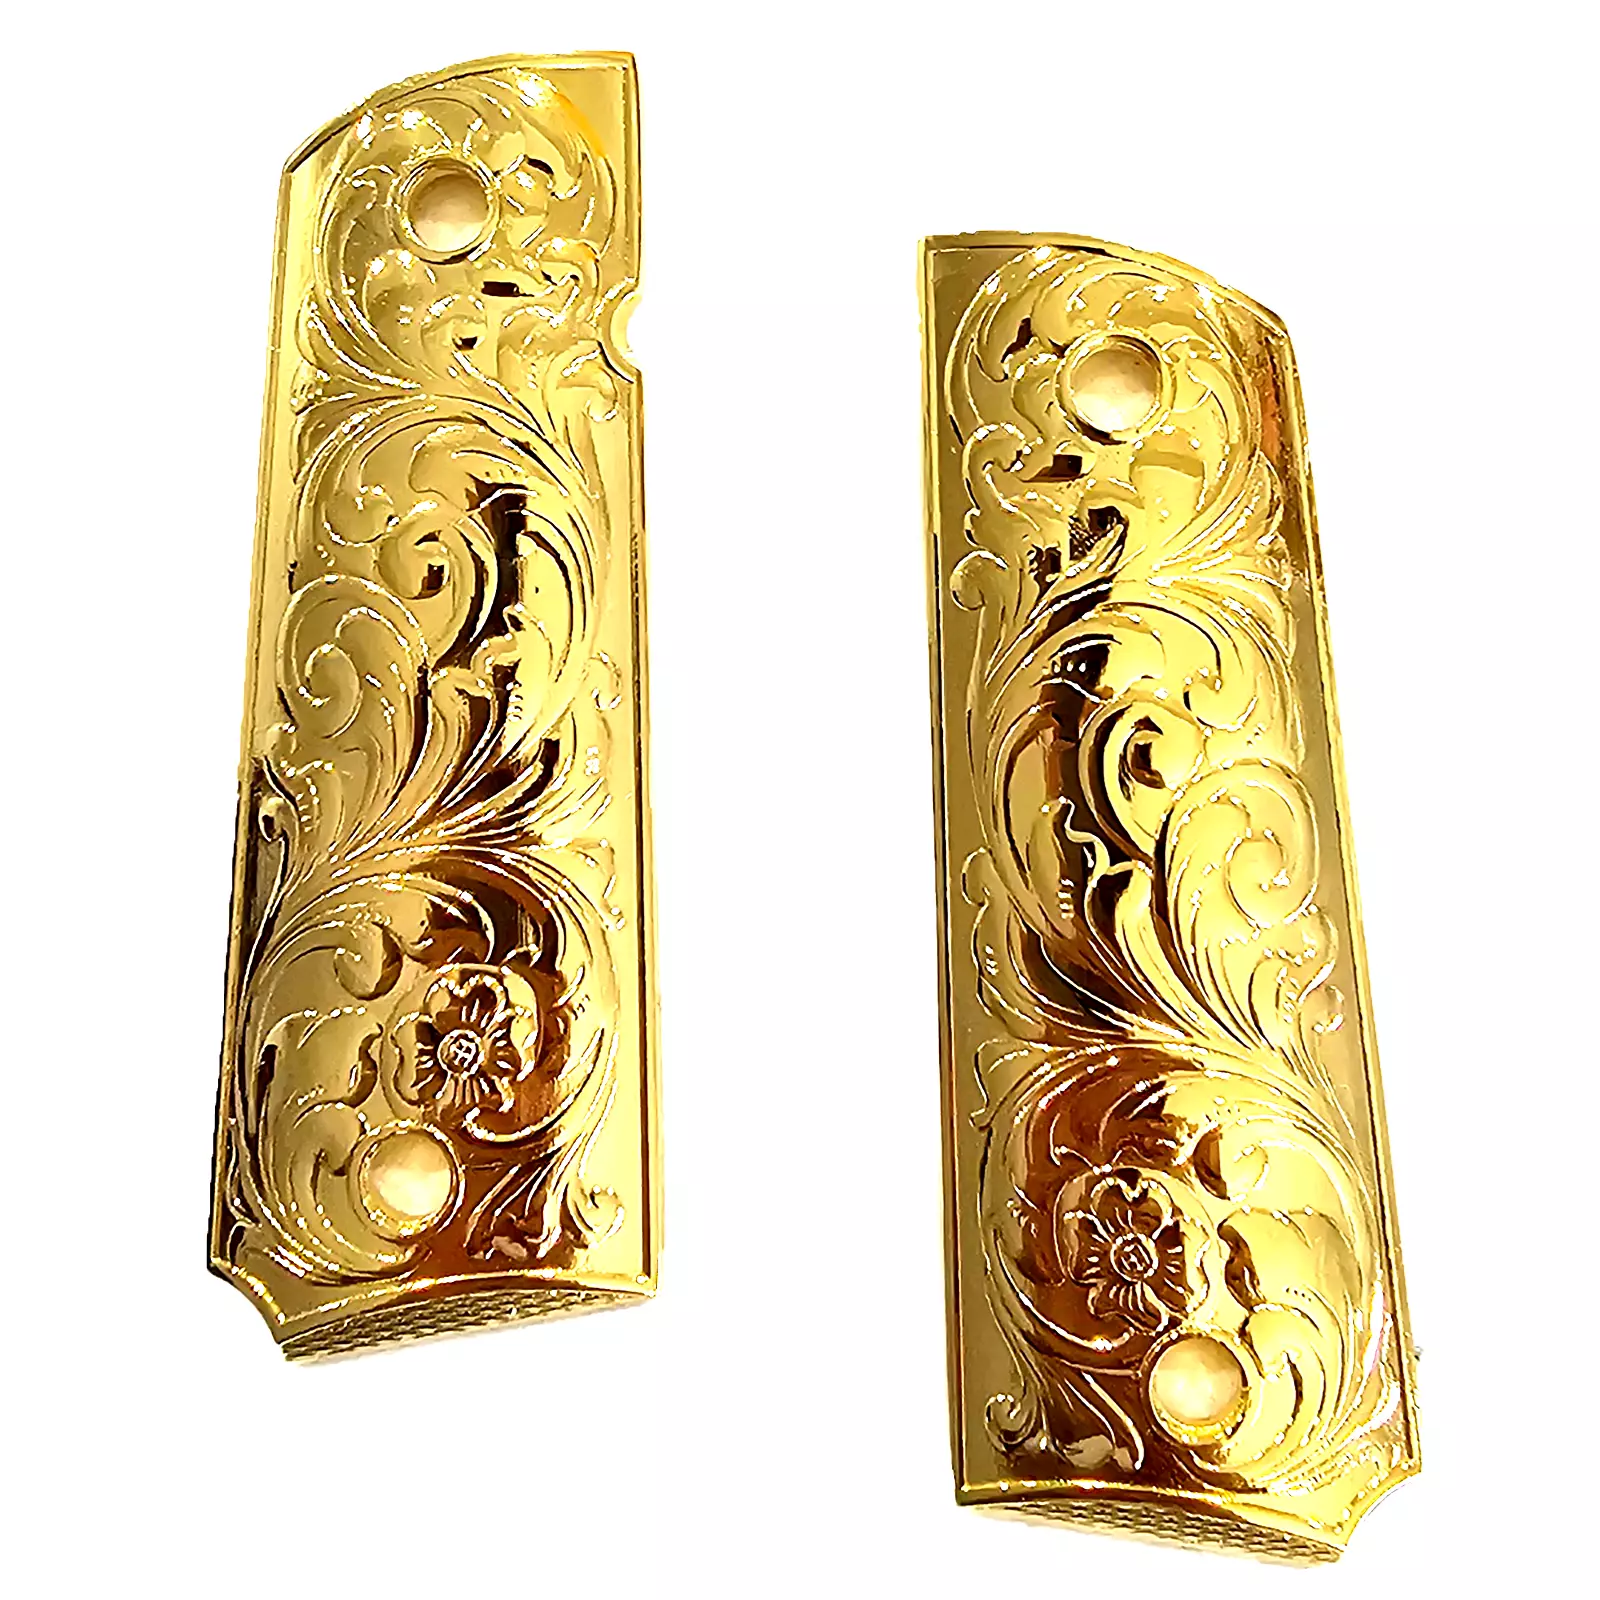 1911 GRIPS FULL SIZE - Metal - Scroll Design W Ambi Safety Gold #T-SC017